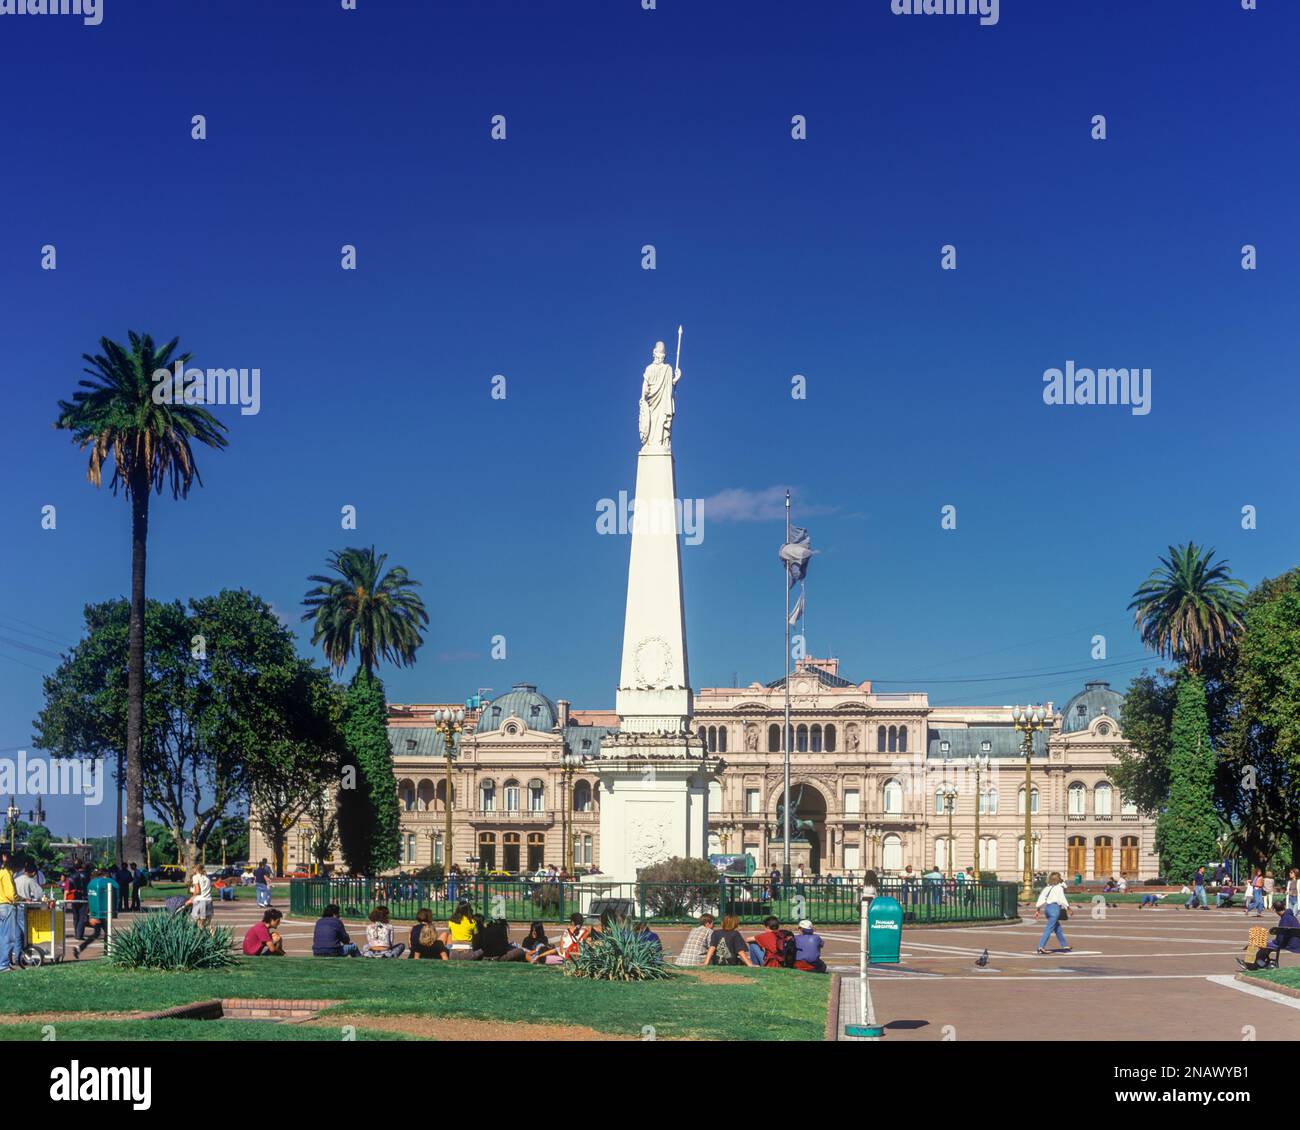 GOVERNMENT HOUSE PLAZA DE MAYO BUENOS AIRES ARGENTINA Stock Photo